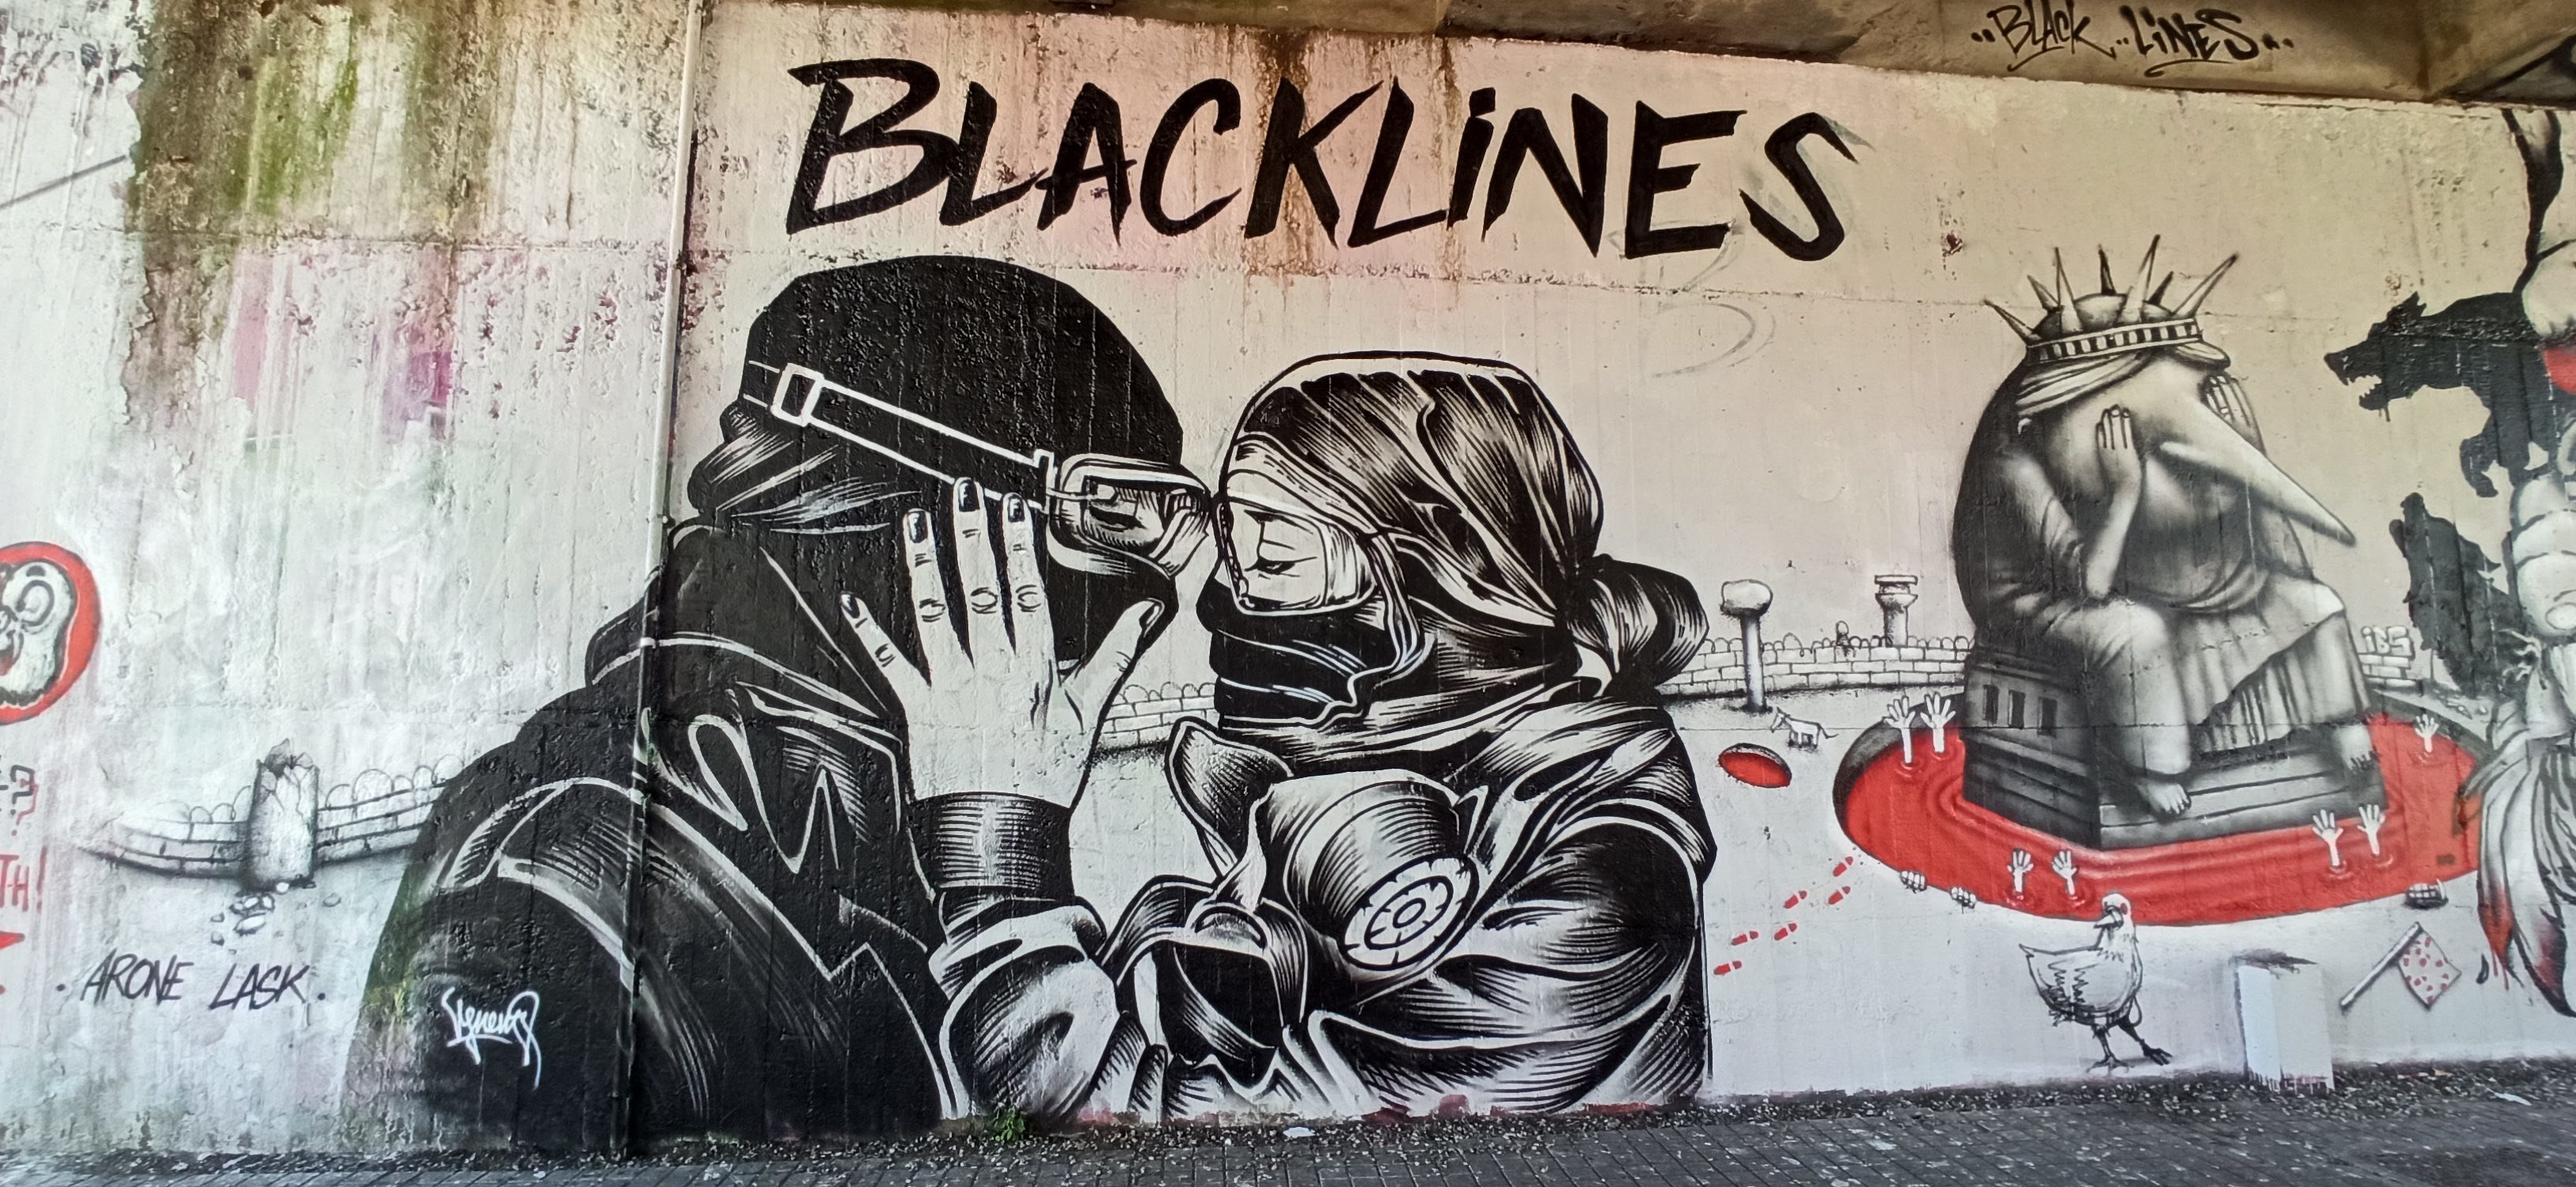 Graffiti 5042 Black lines captured by Rabot in Nantes France